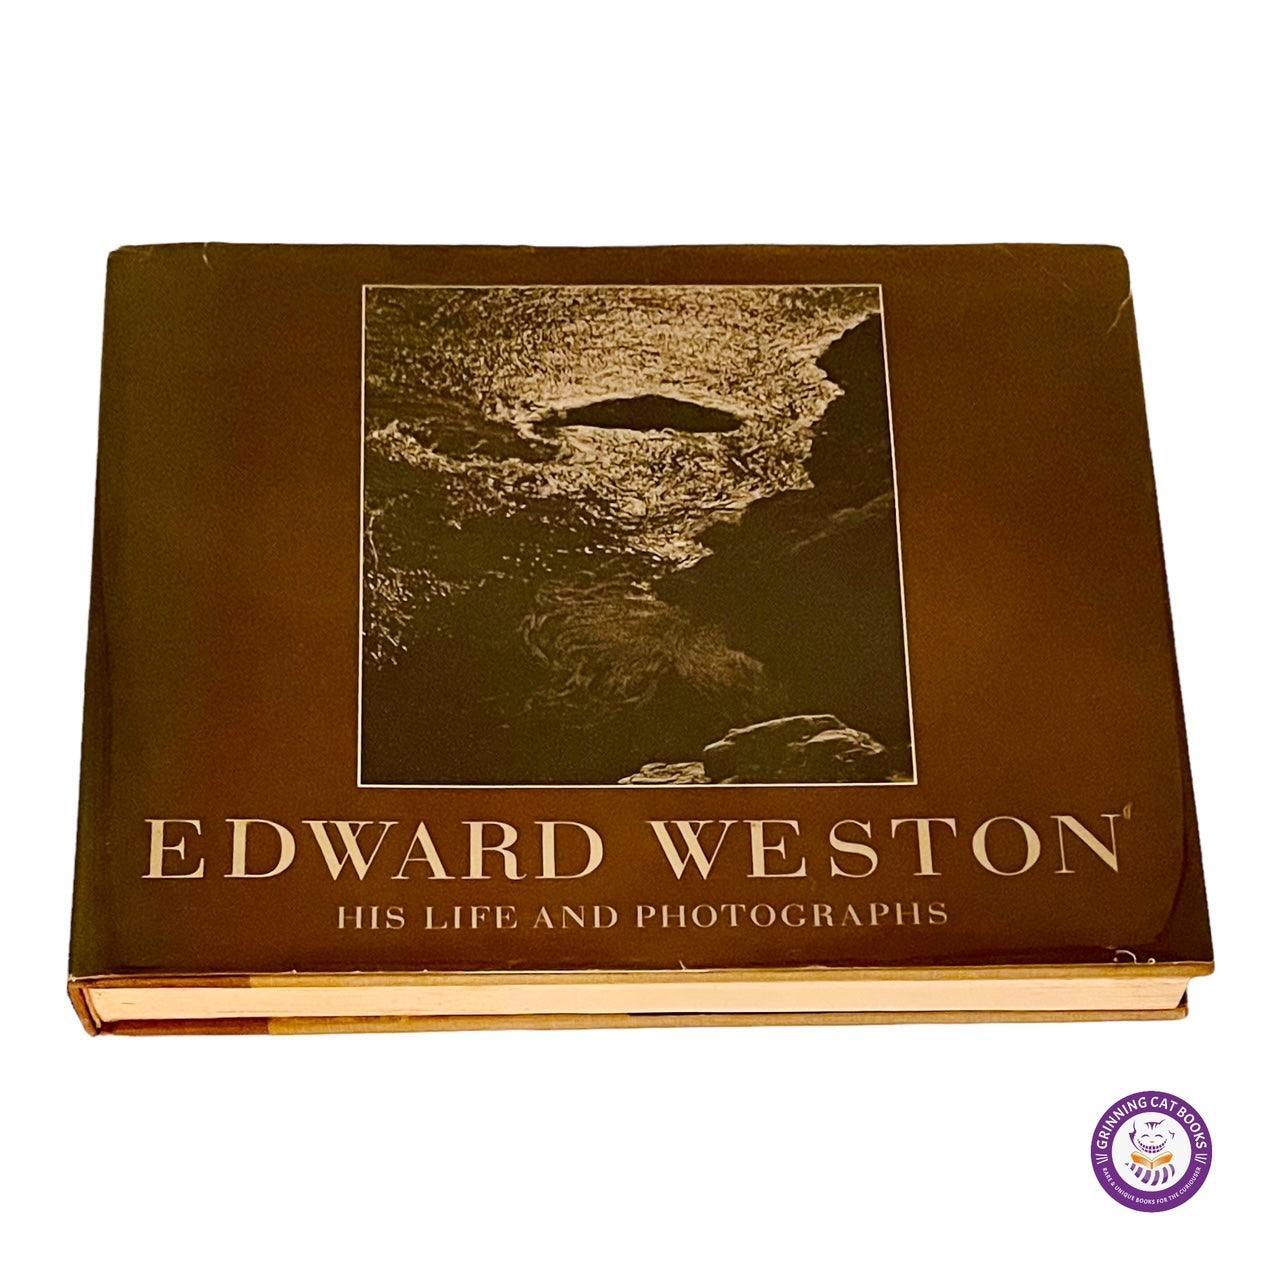 Edward Weston: His Life and Photographs - Grinning Cat Books - PHOTOGRAPHY - PHOTOGRAPHY